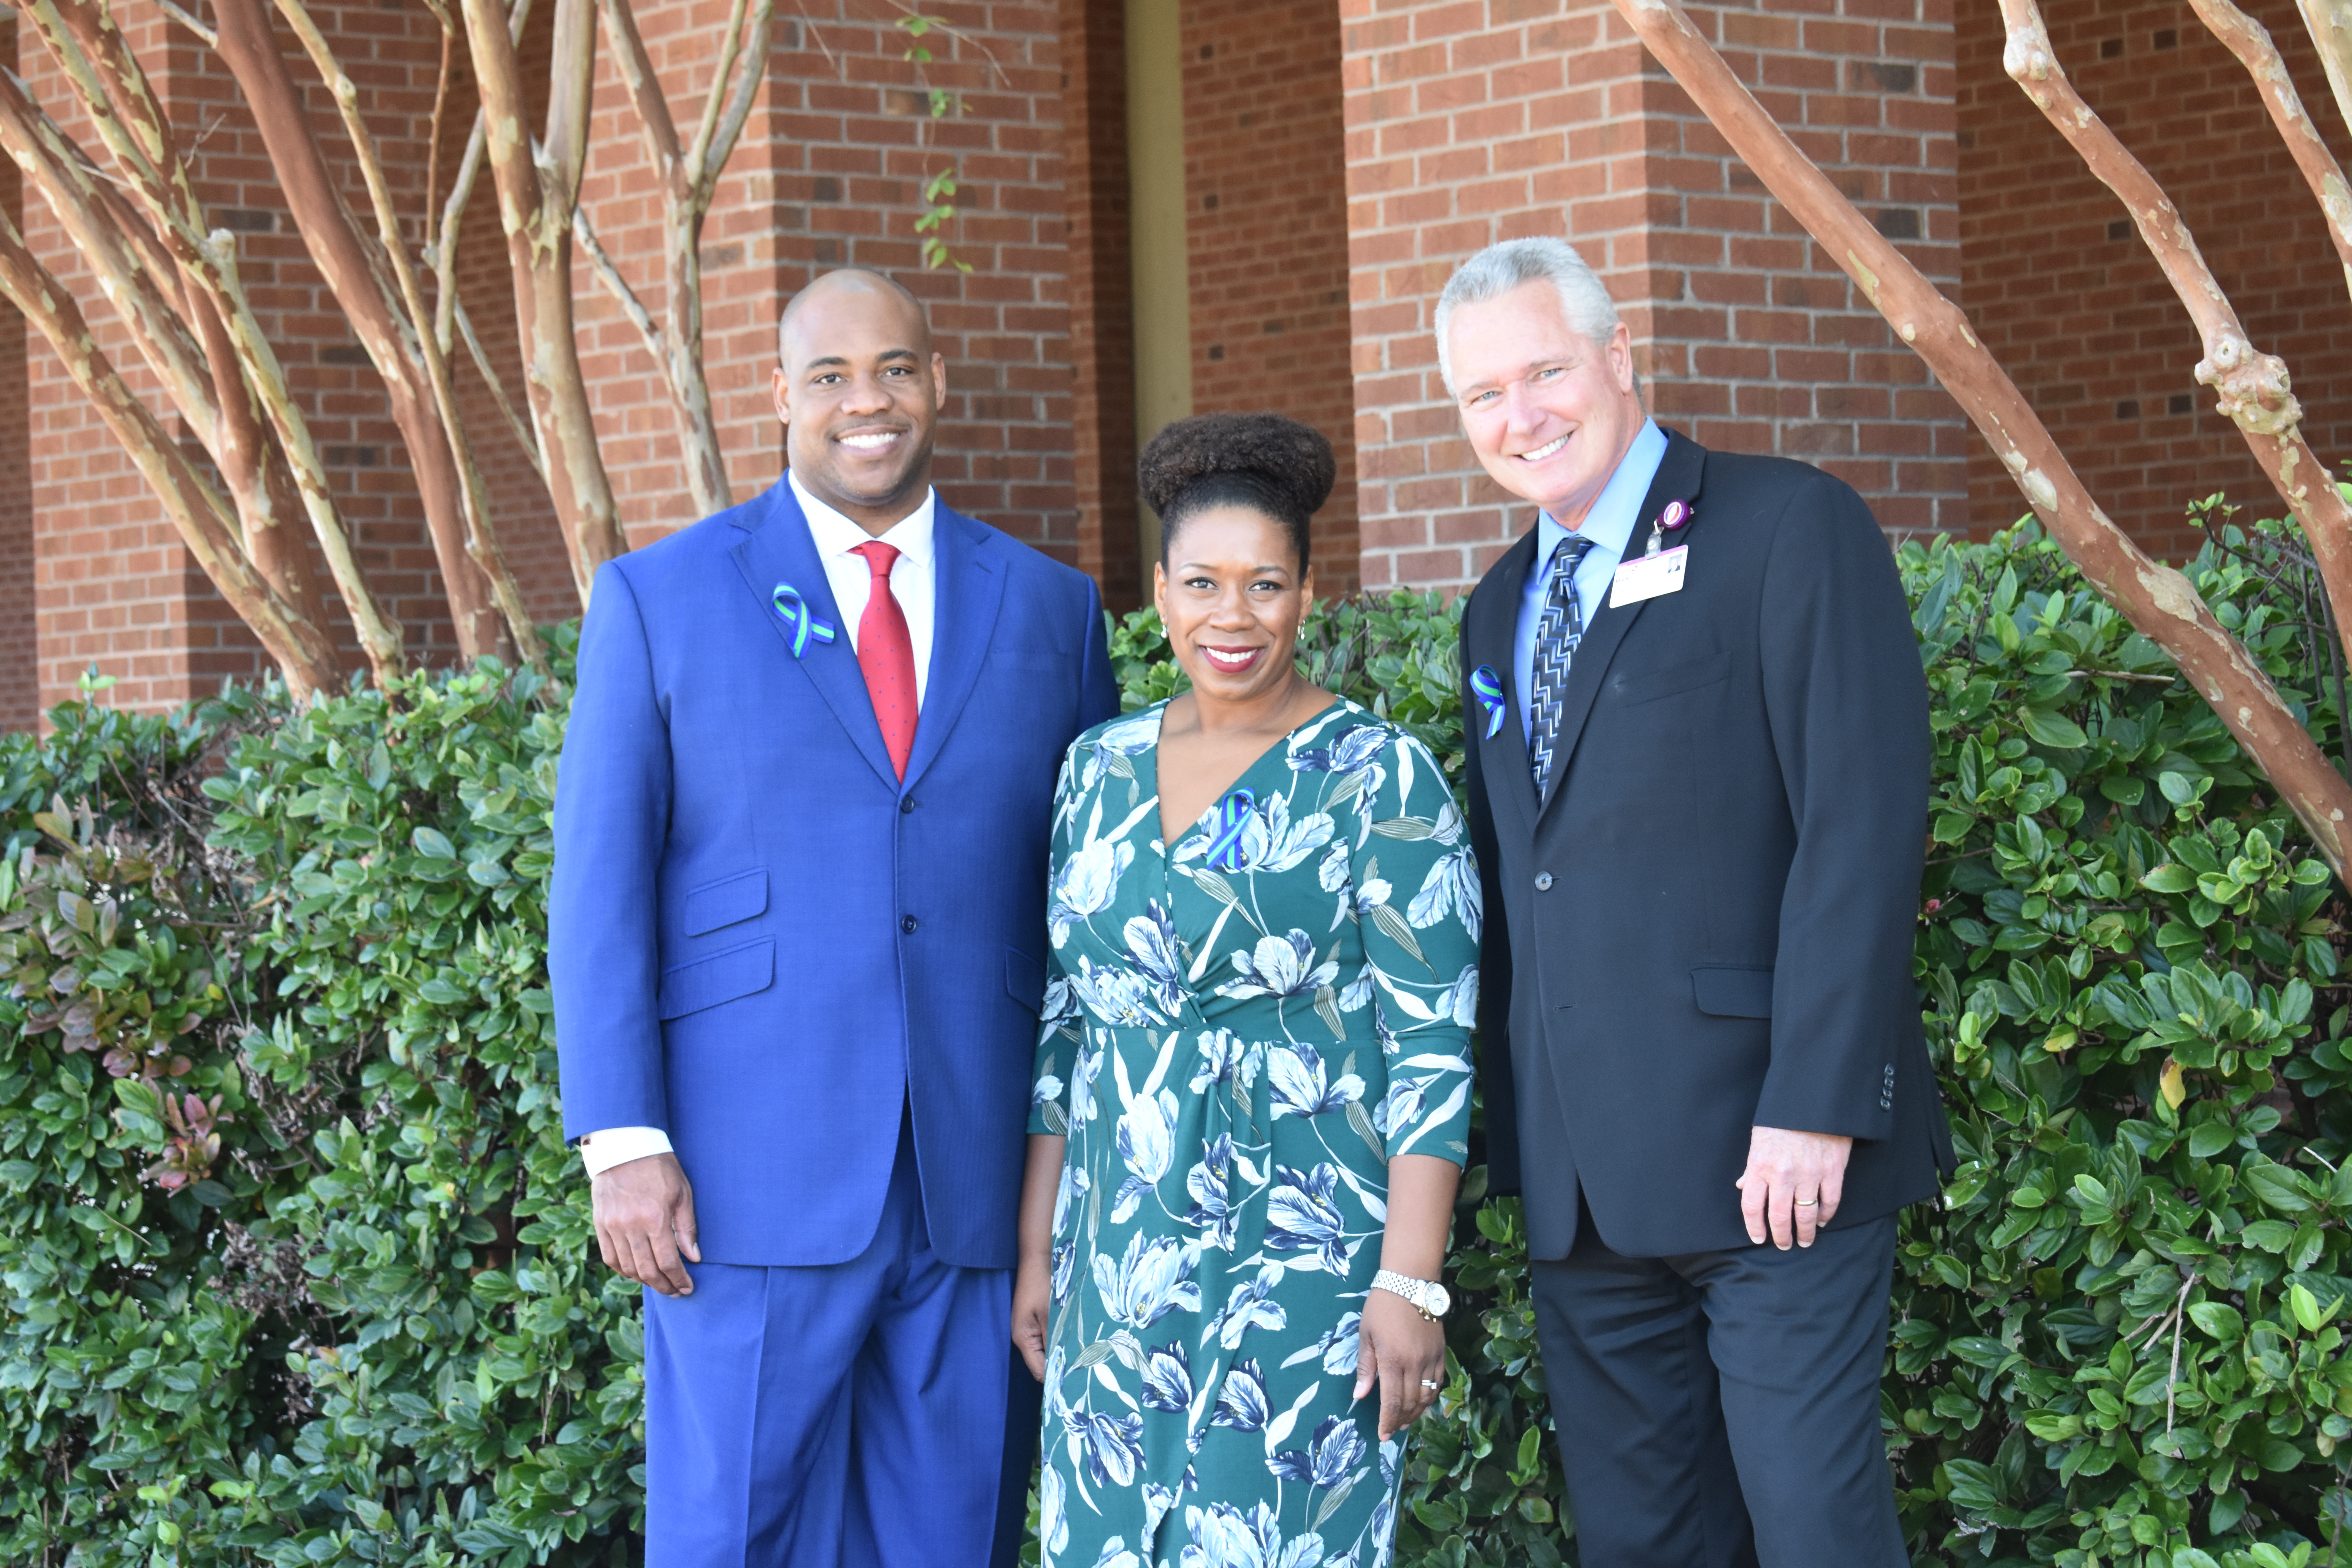 From left to right: Representatives from the HTC Core Partners - Anton Gunn (MUSC), Kellye McKenzie (Trident United Way), and Mark Dickson (Roper St. Francis Healthcare)